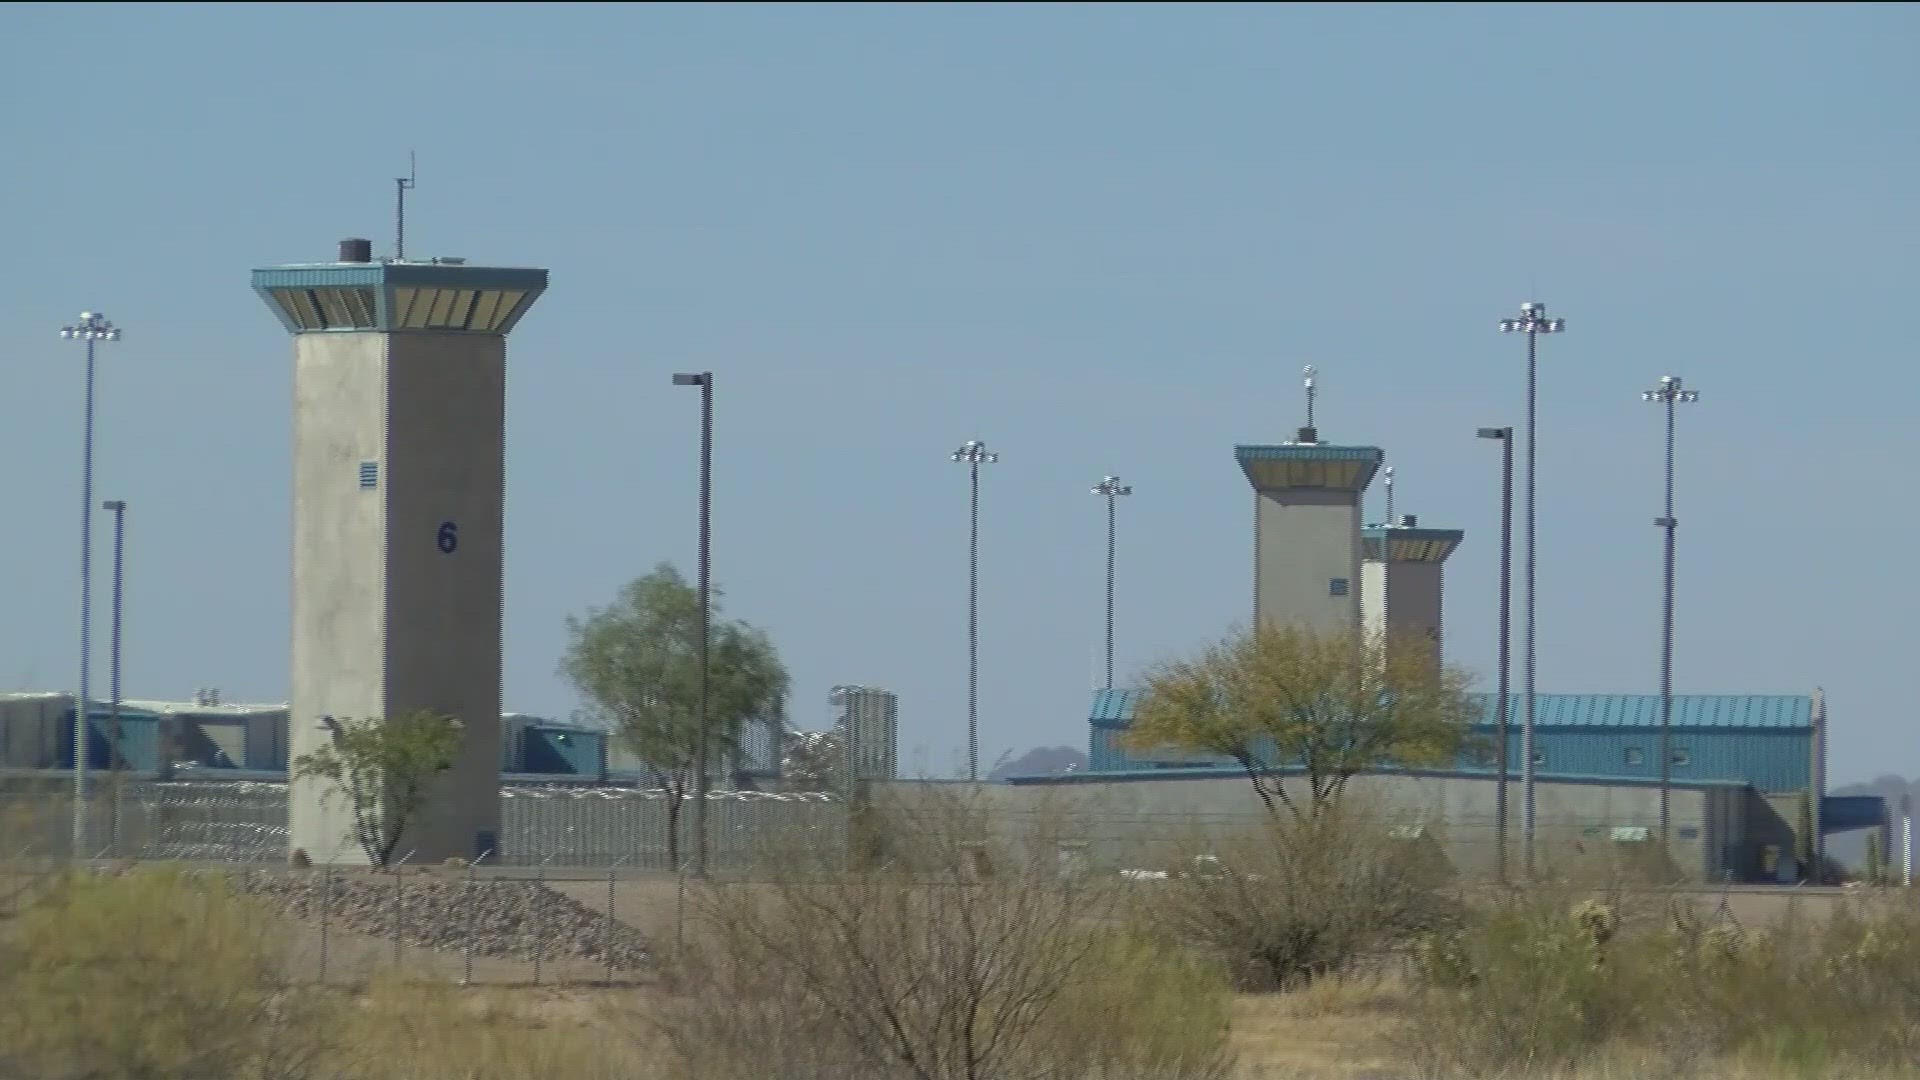 The attack happened at the Federal Correctional Institution, Tucson, a medium-security prison that has been plagued by security lapses and staffing shortages.